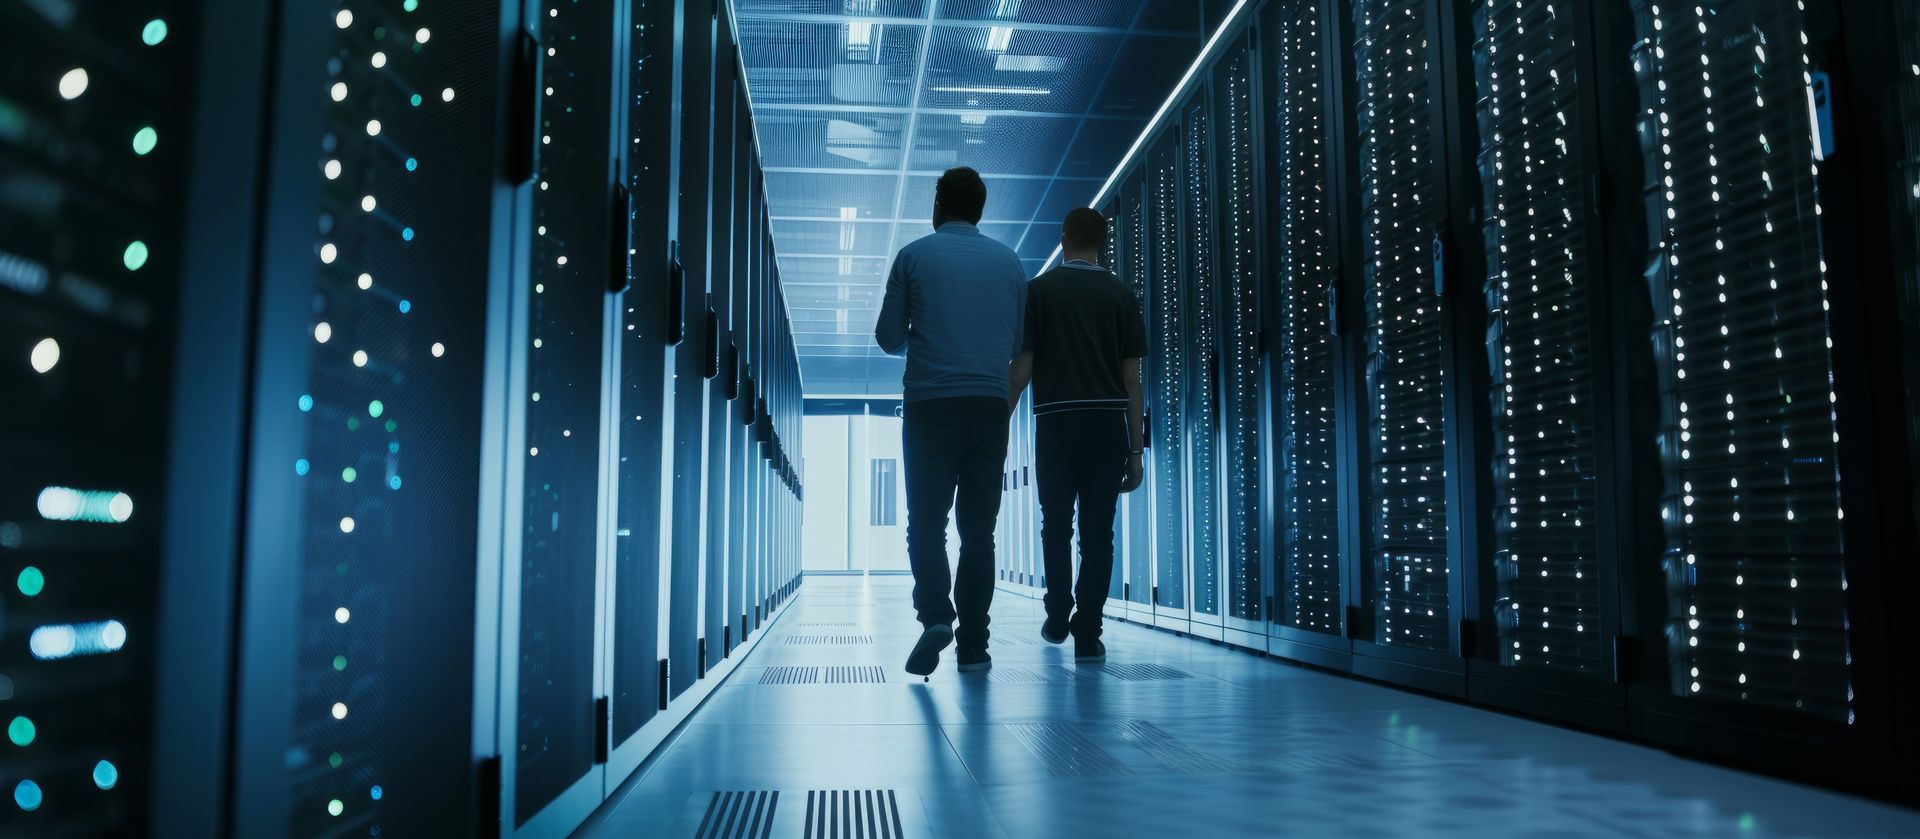 Two men are walking through a server room in a data center.